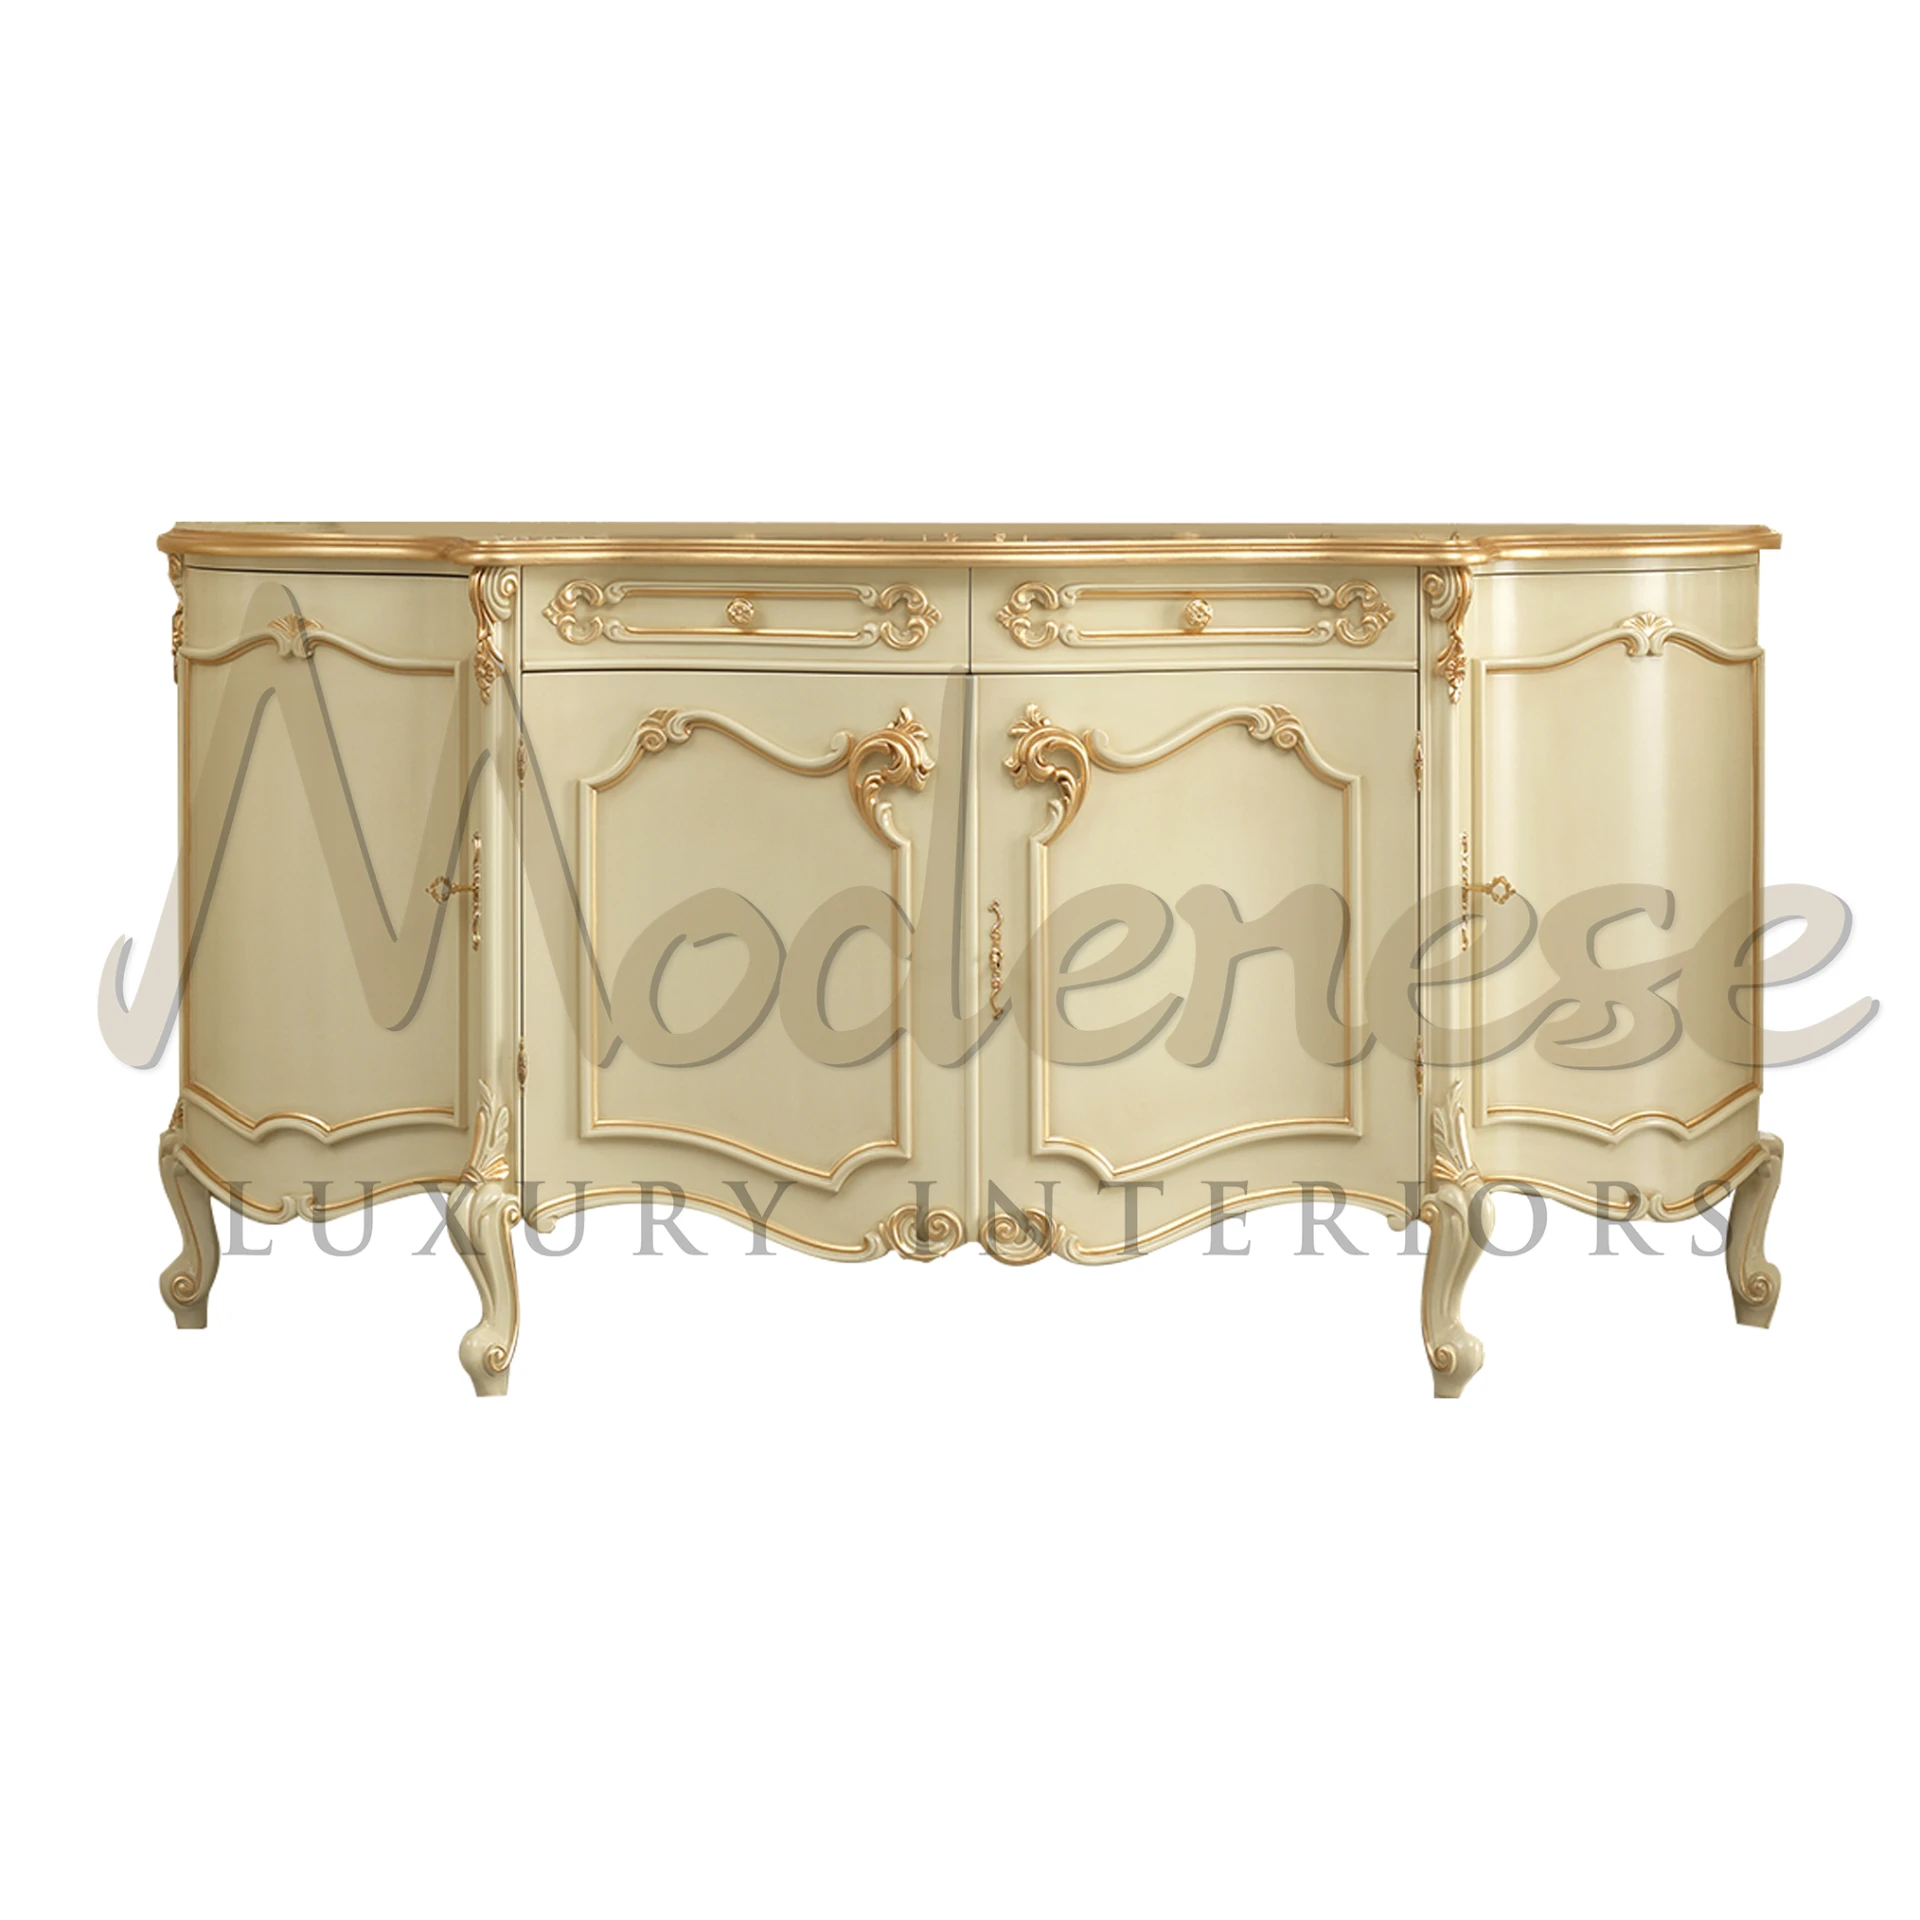 Luxurious victorian style sideboard with a classic golden design